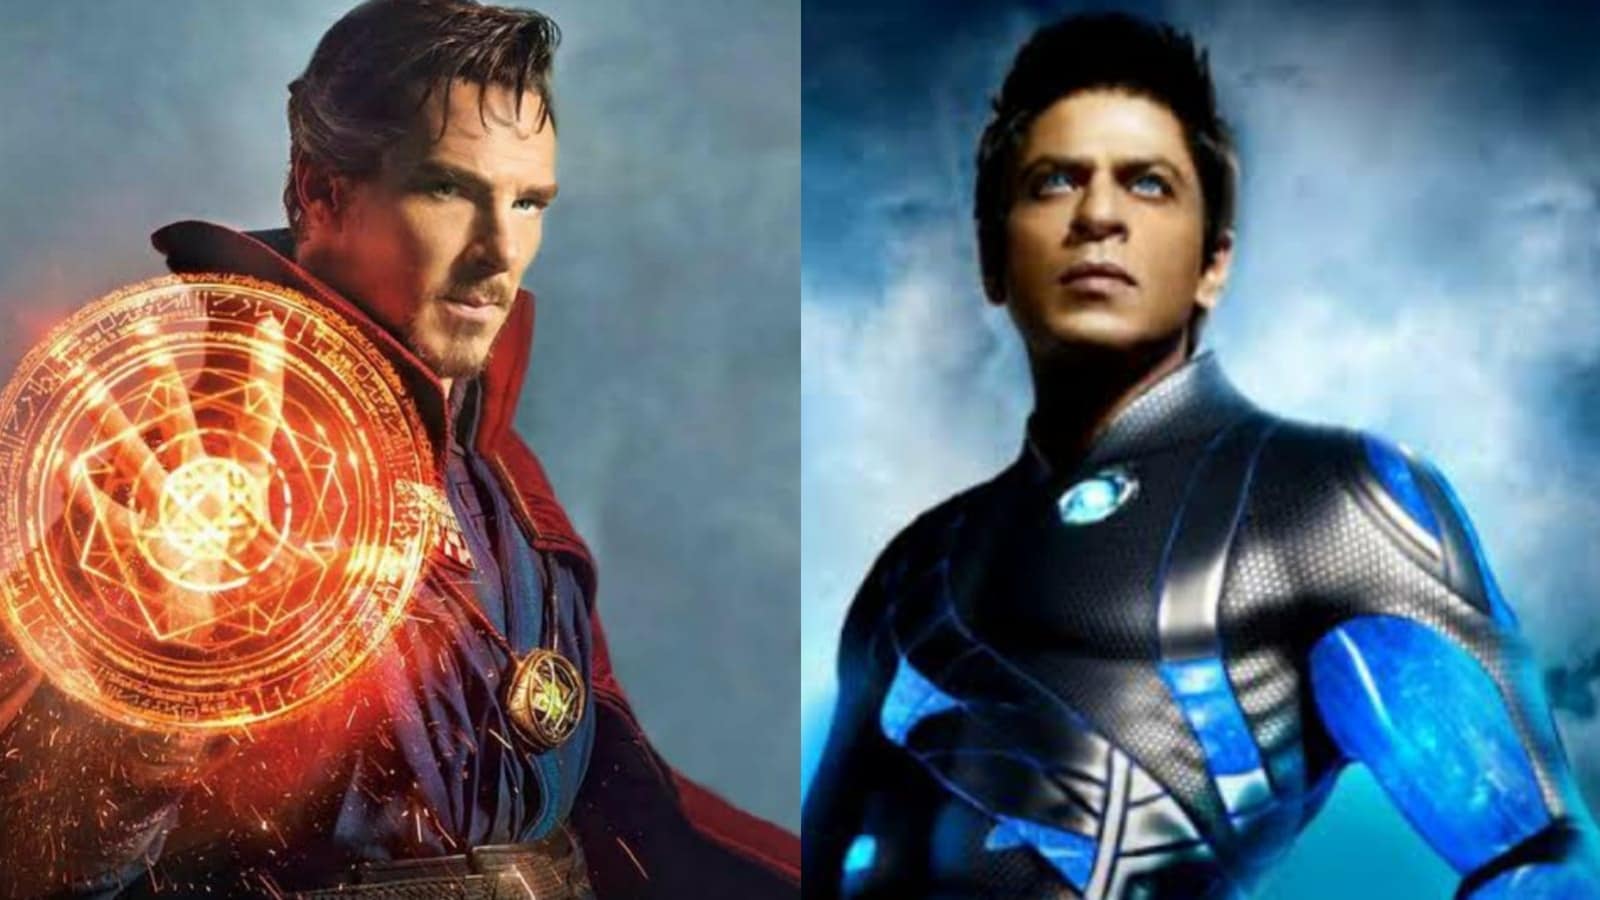 Doctor Strange star Benedict Cumberbatch chooses Shah Rukh Khan over Hrithik Roshan to be part of MCU: ‘Khan is great’